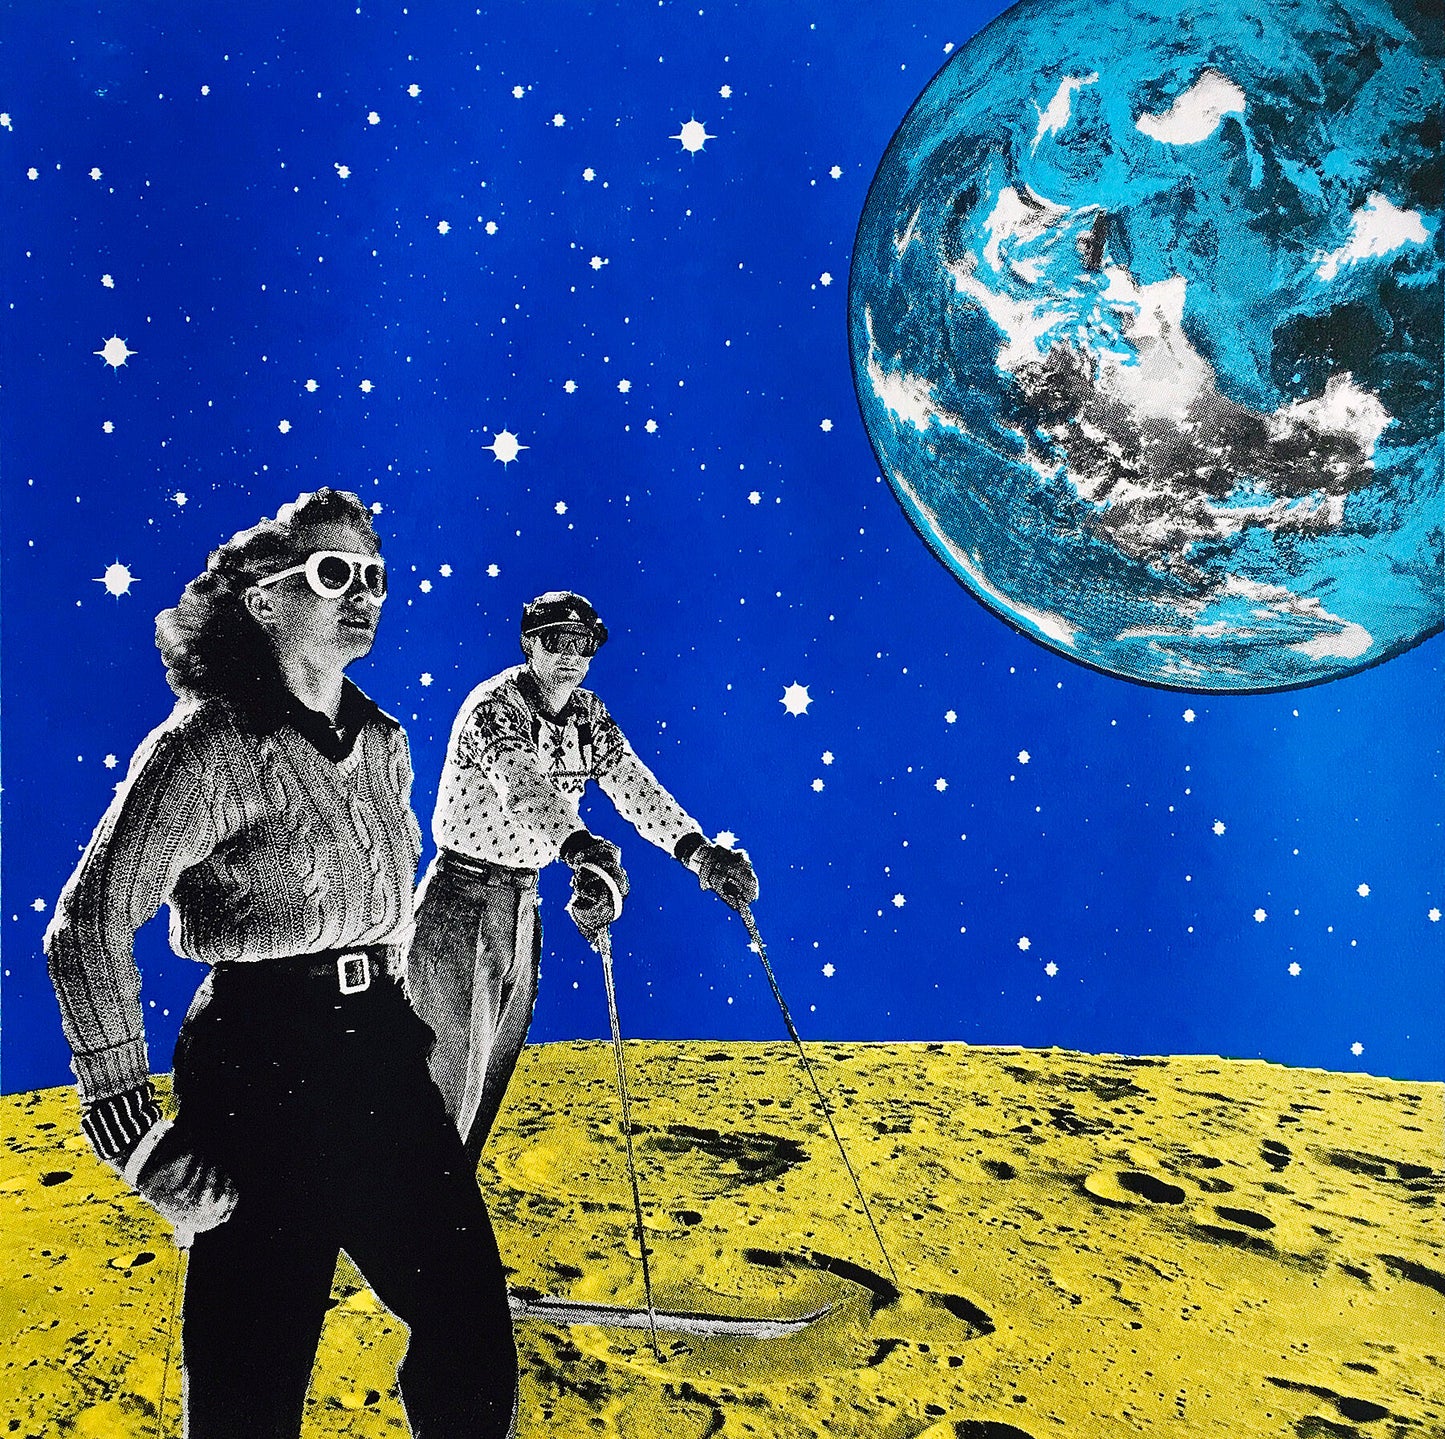 Image of the unframed print ‘Hiking space' by Anne Storno, depicting a man and a woman in chic outfits ski upon the surface of a vibrant yellow moon; A light blue and white coloured Earth floats in the background, against a sky full of sparkling stars 8365614